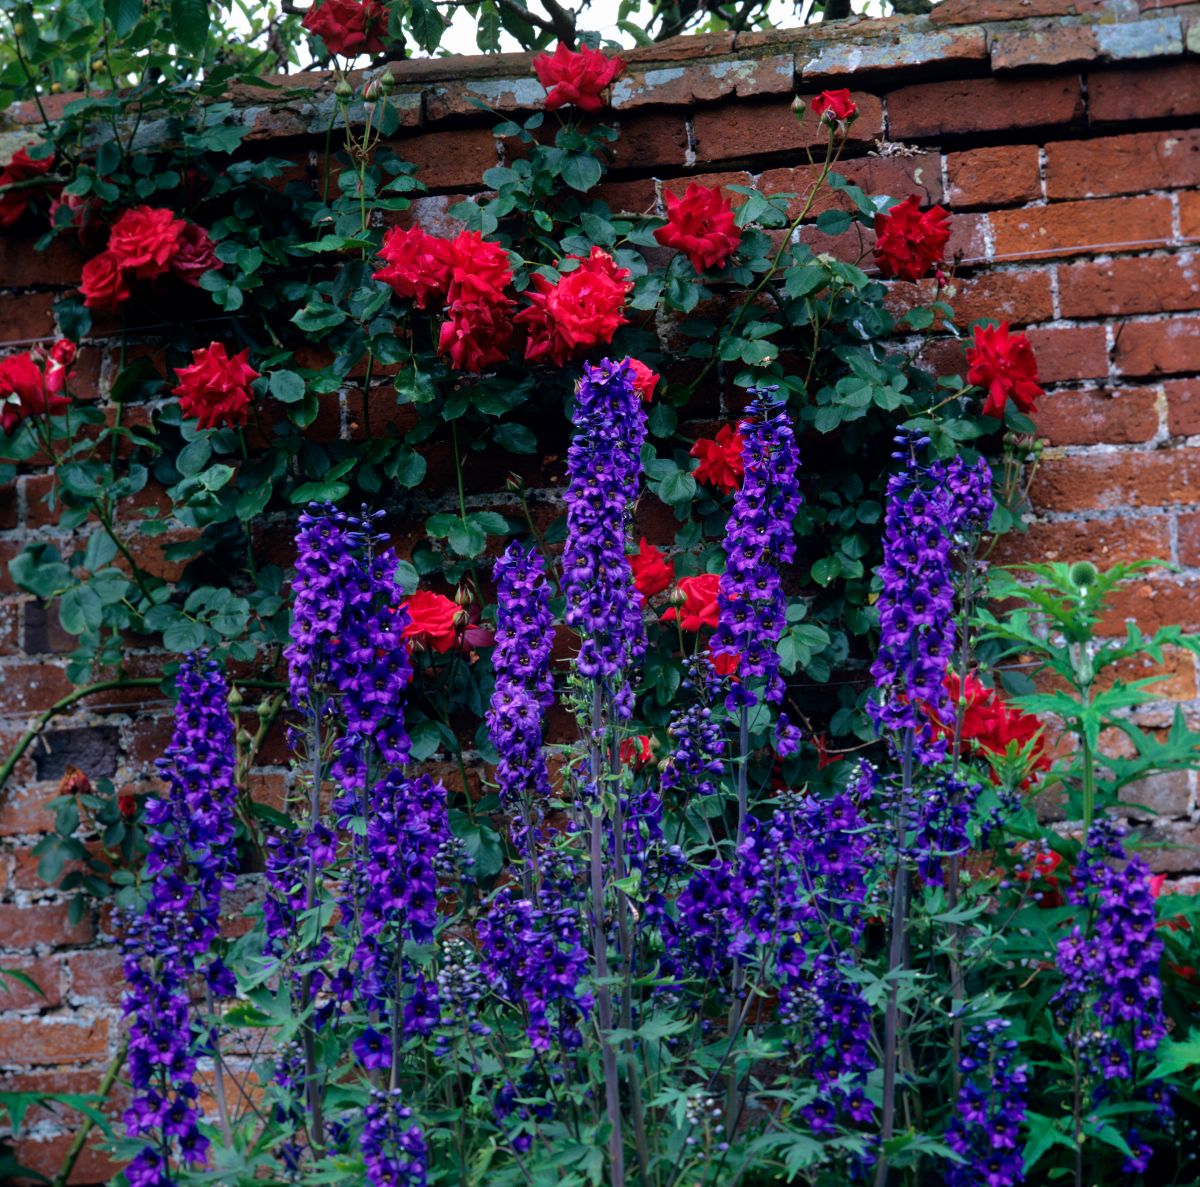 Delphiniums nicely offset red climbing roses in a cottage garden